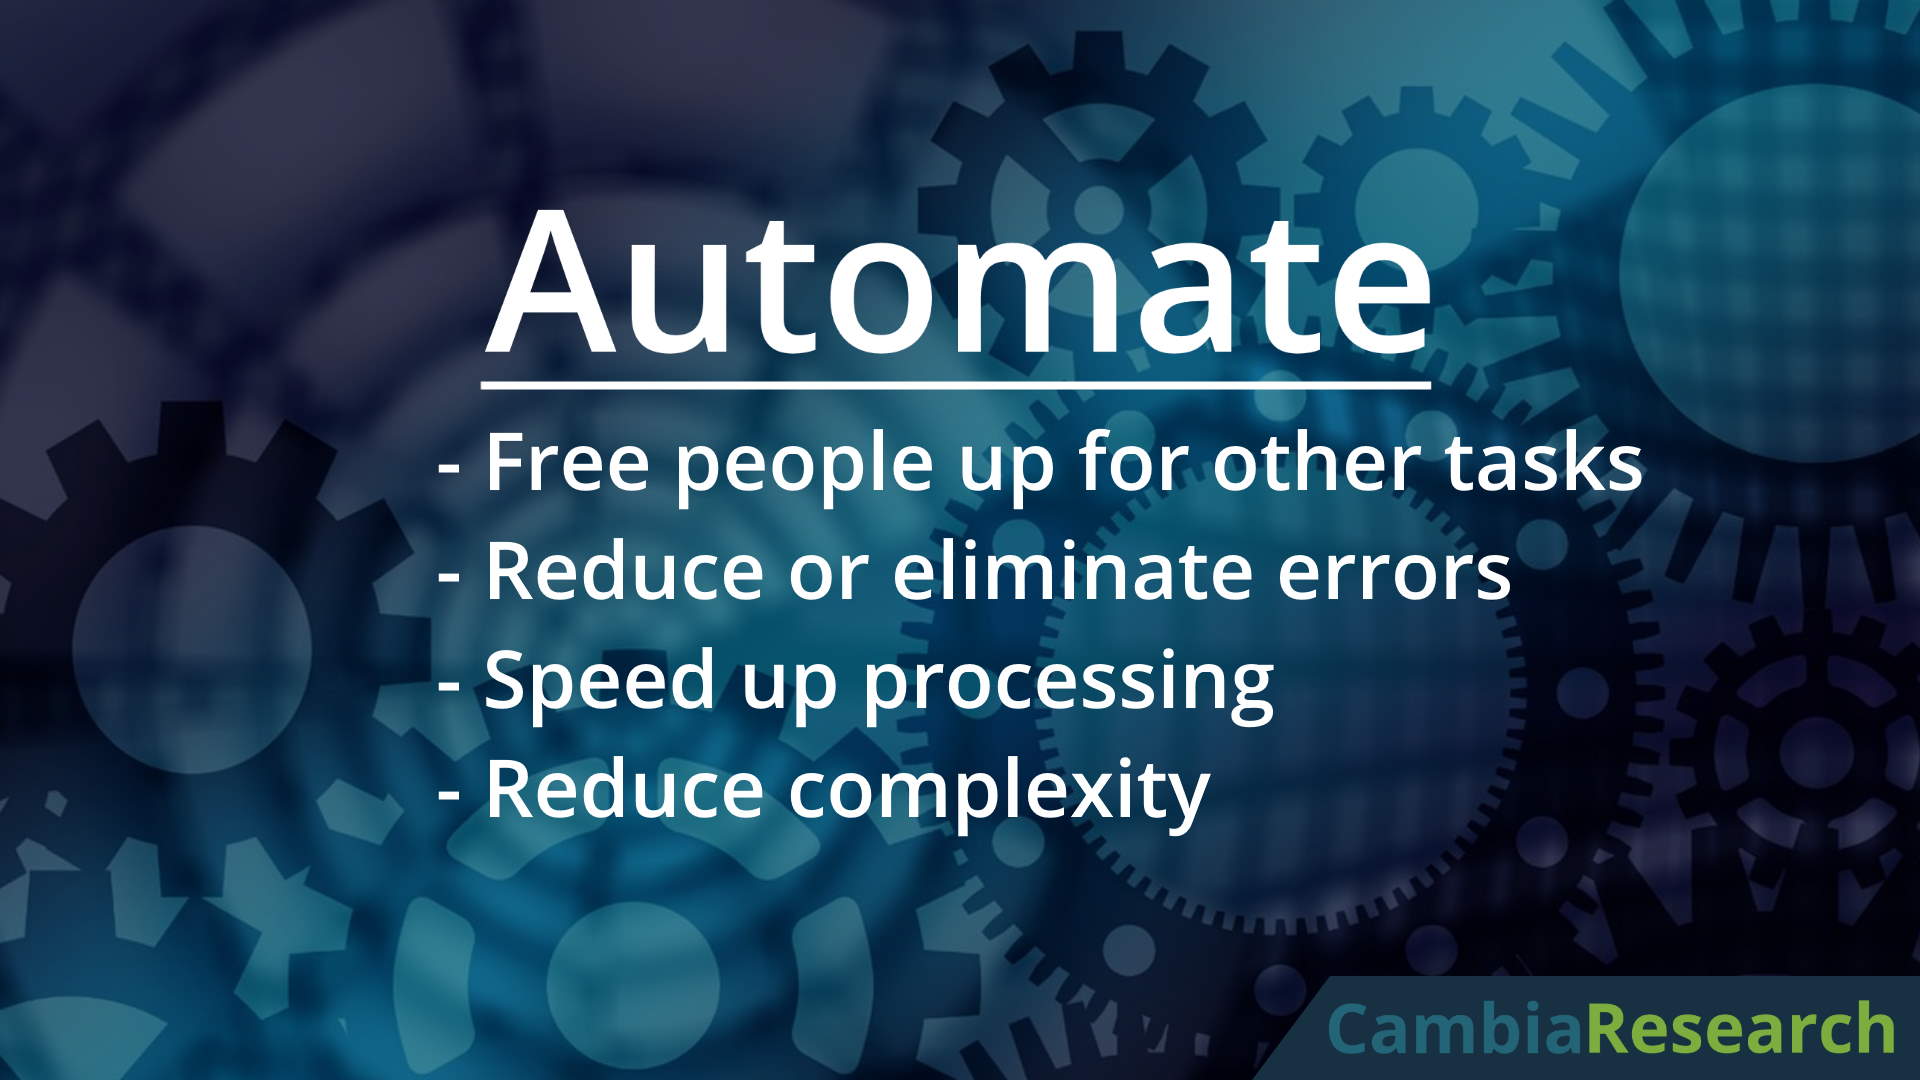 Automate your business processes with custom software.